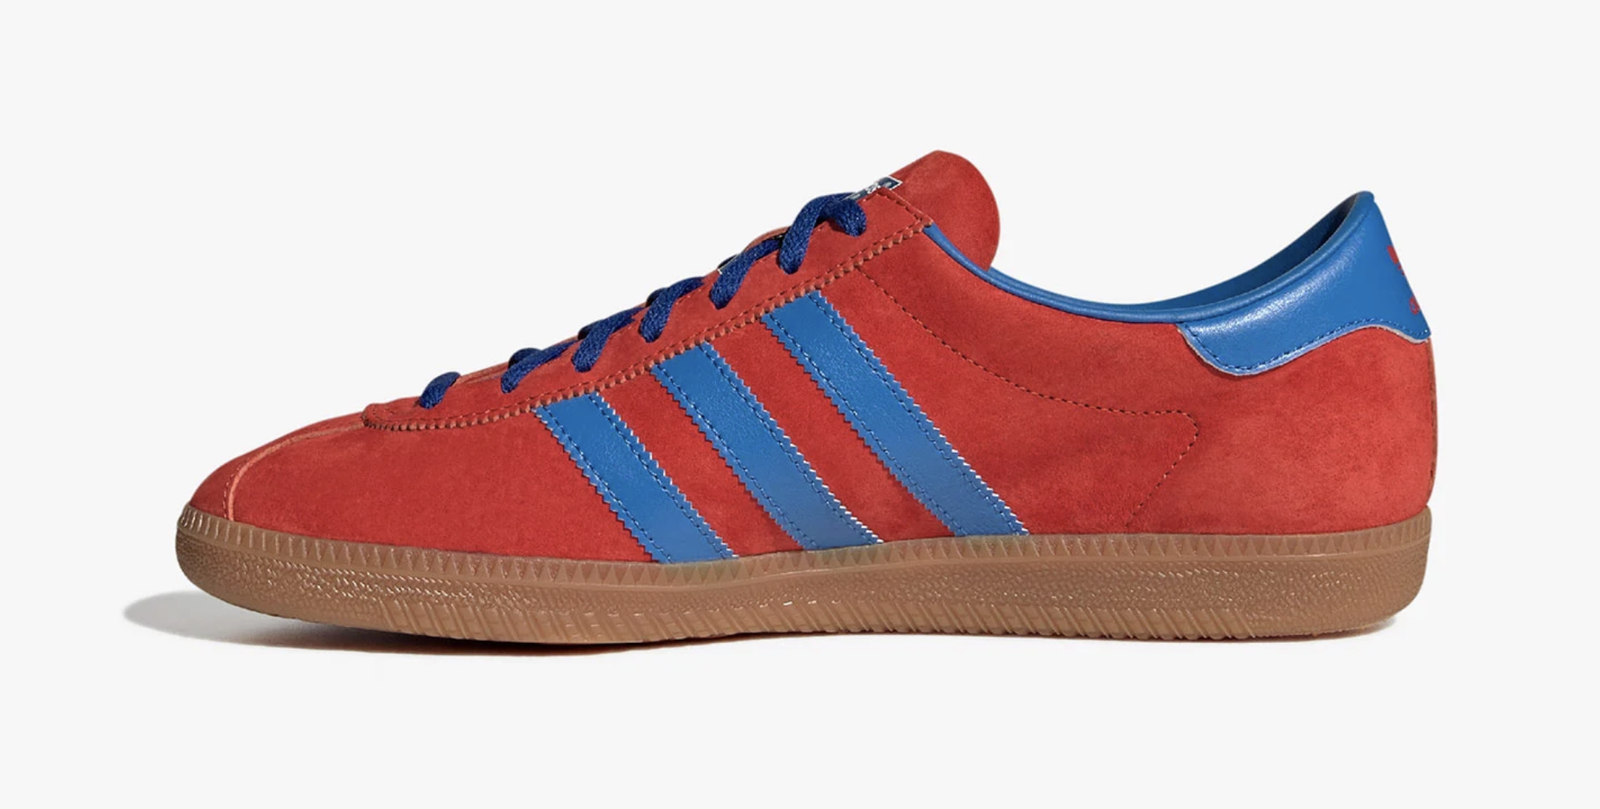 Adidas Originals Rouge (HO1797) Trainers Lifestyle Red Leather - New | eBay